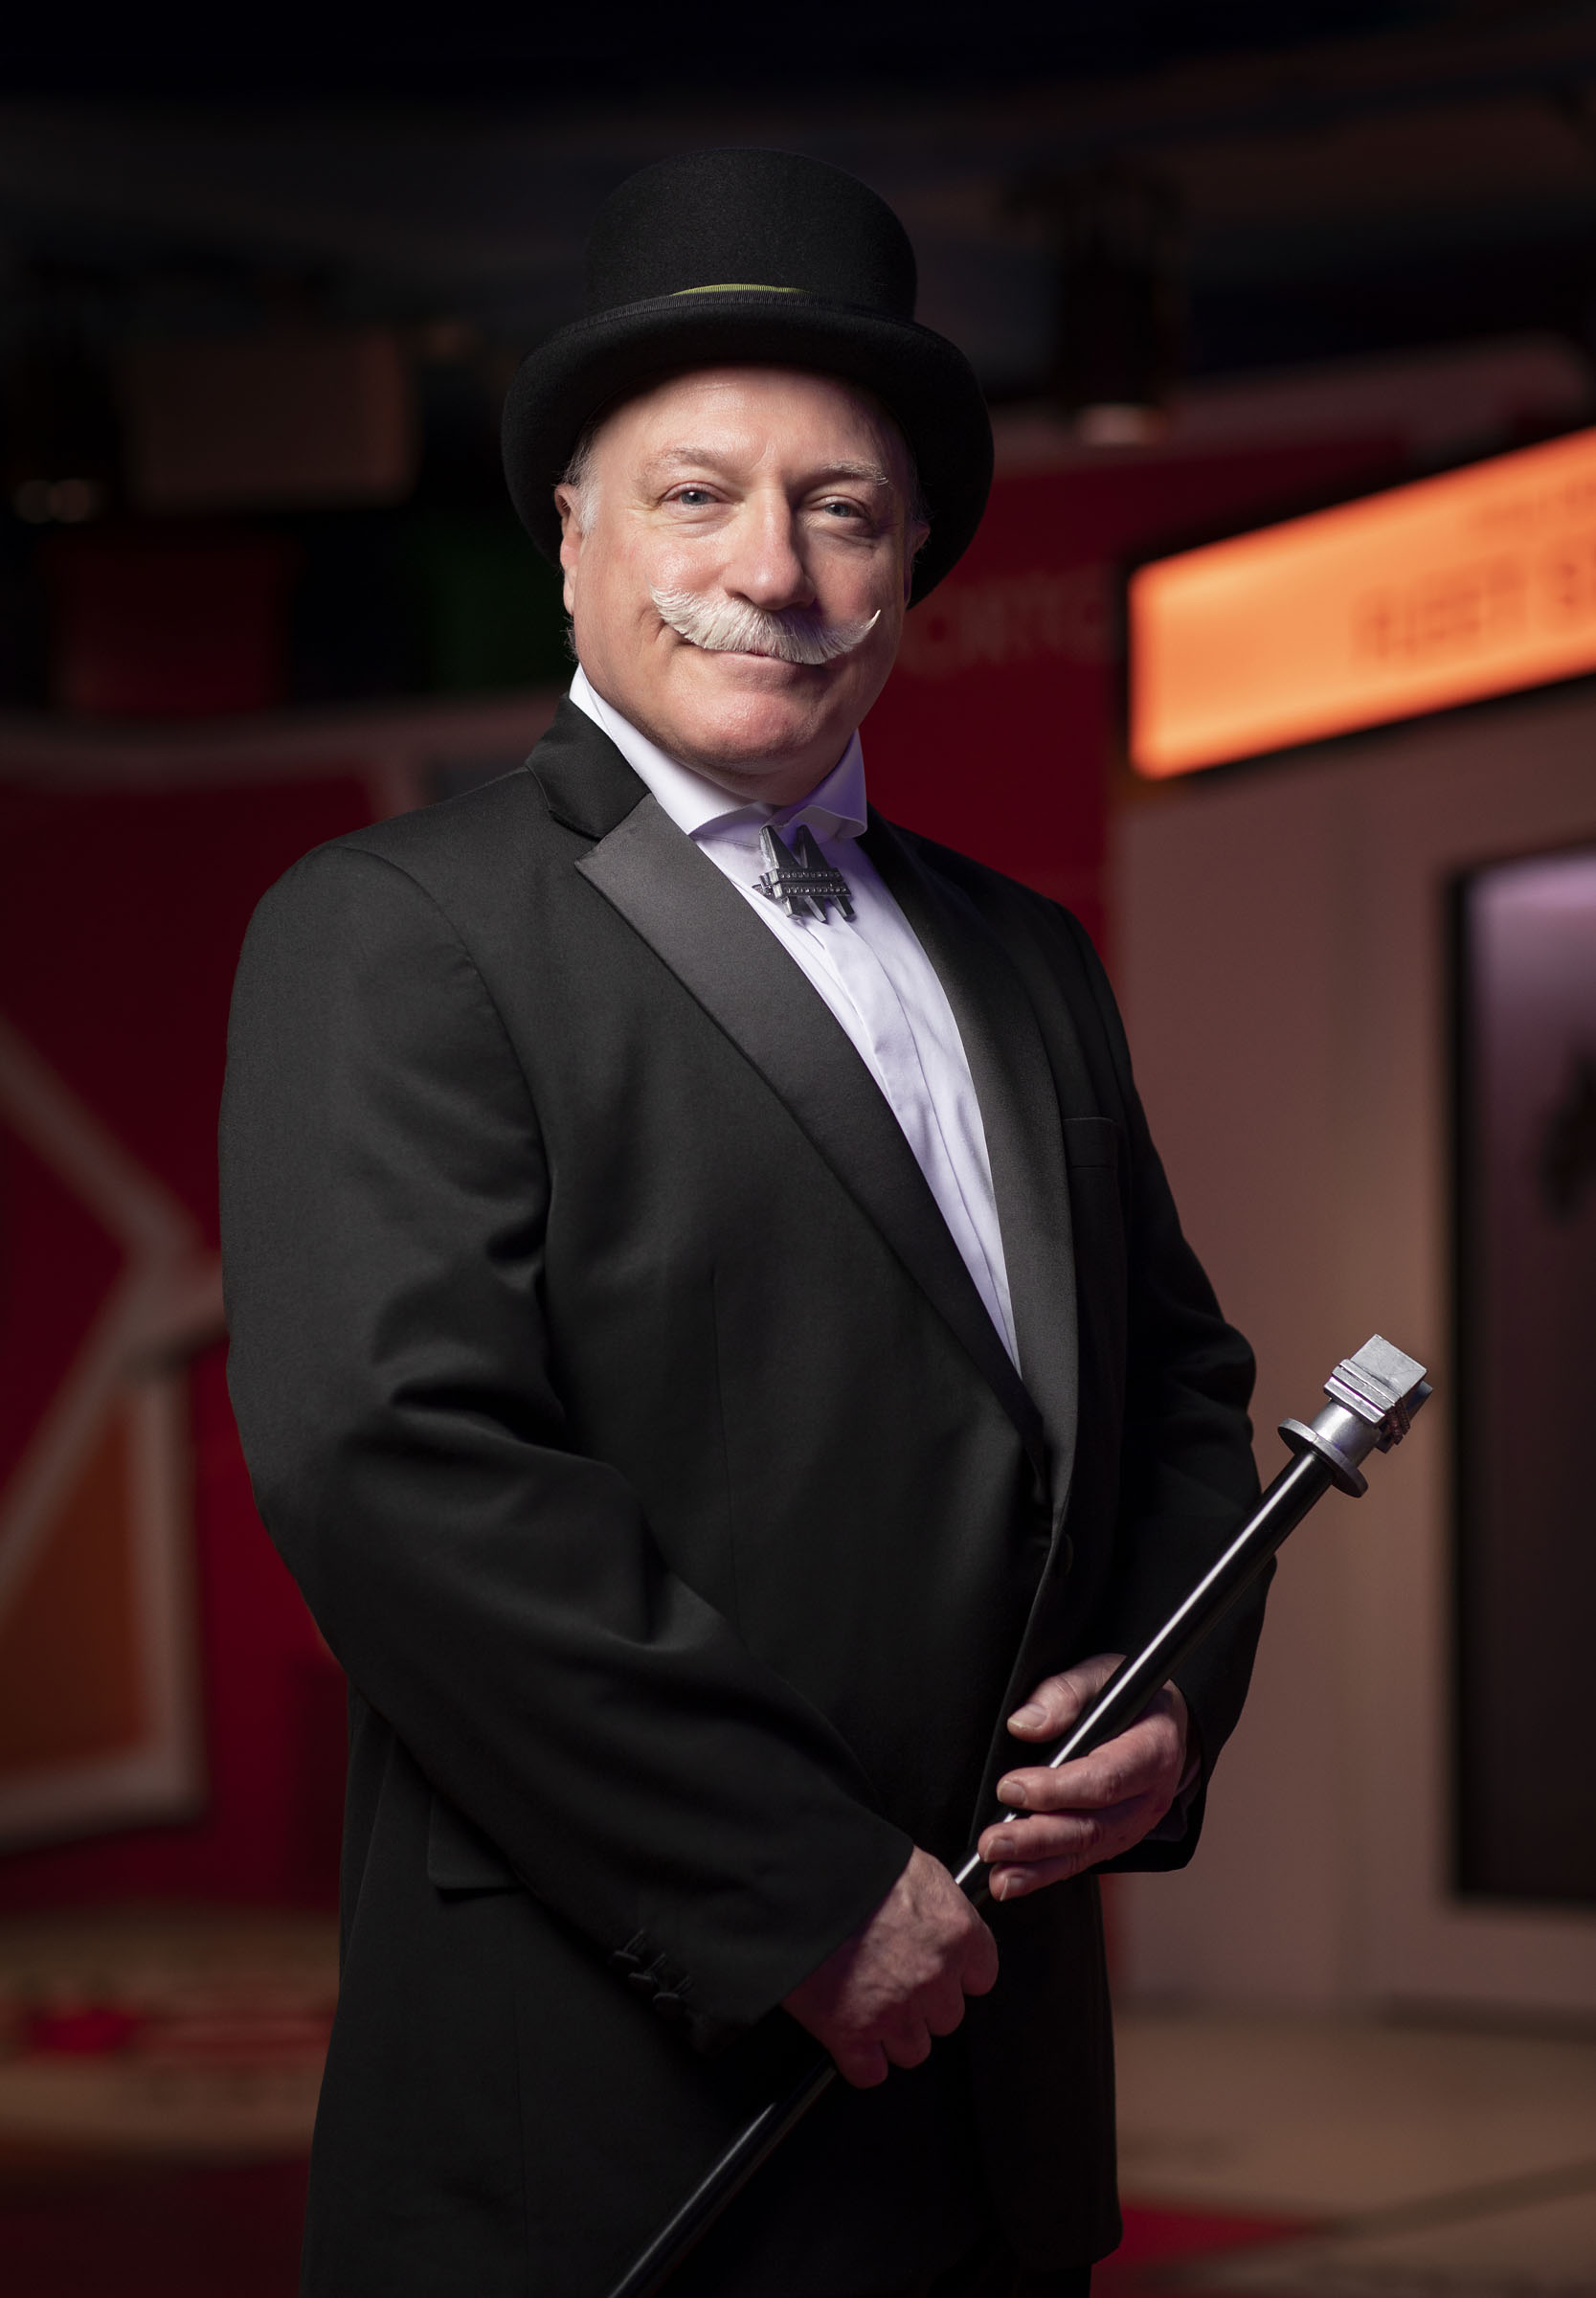 Portrait of the Top Hat actor in Monopoly Lifesized